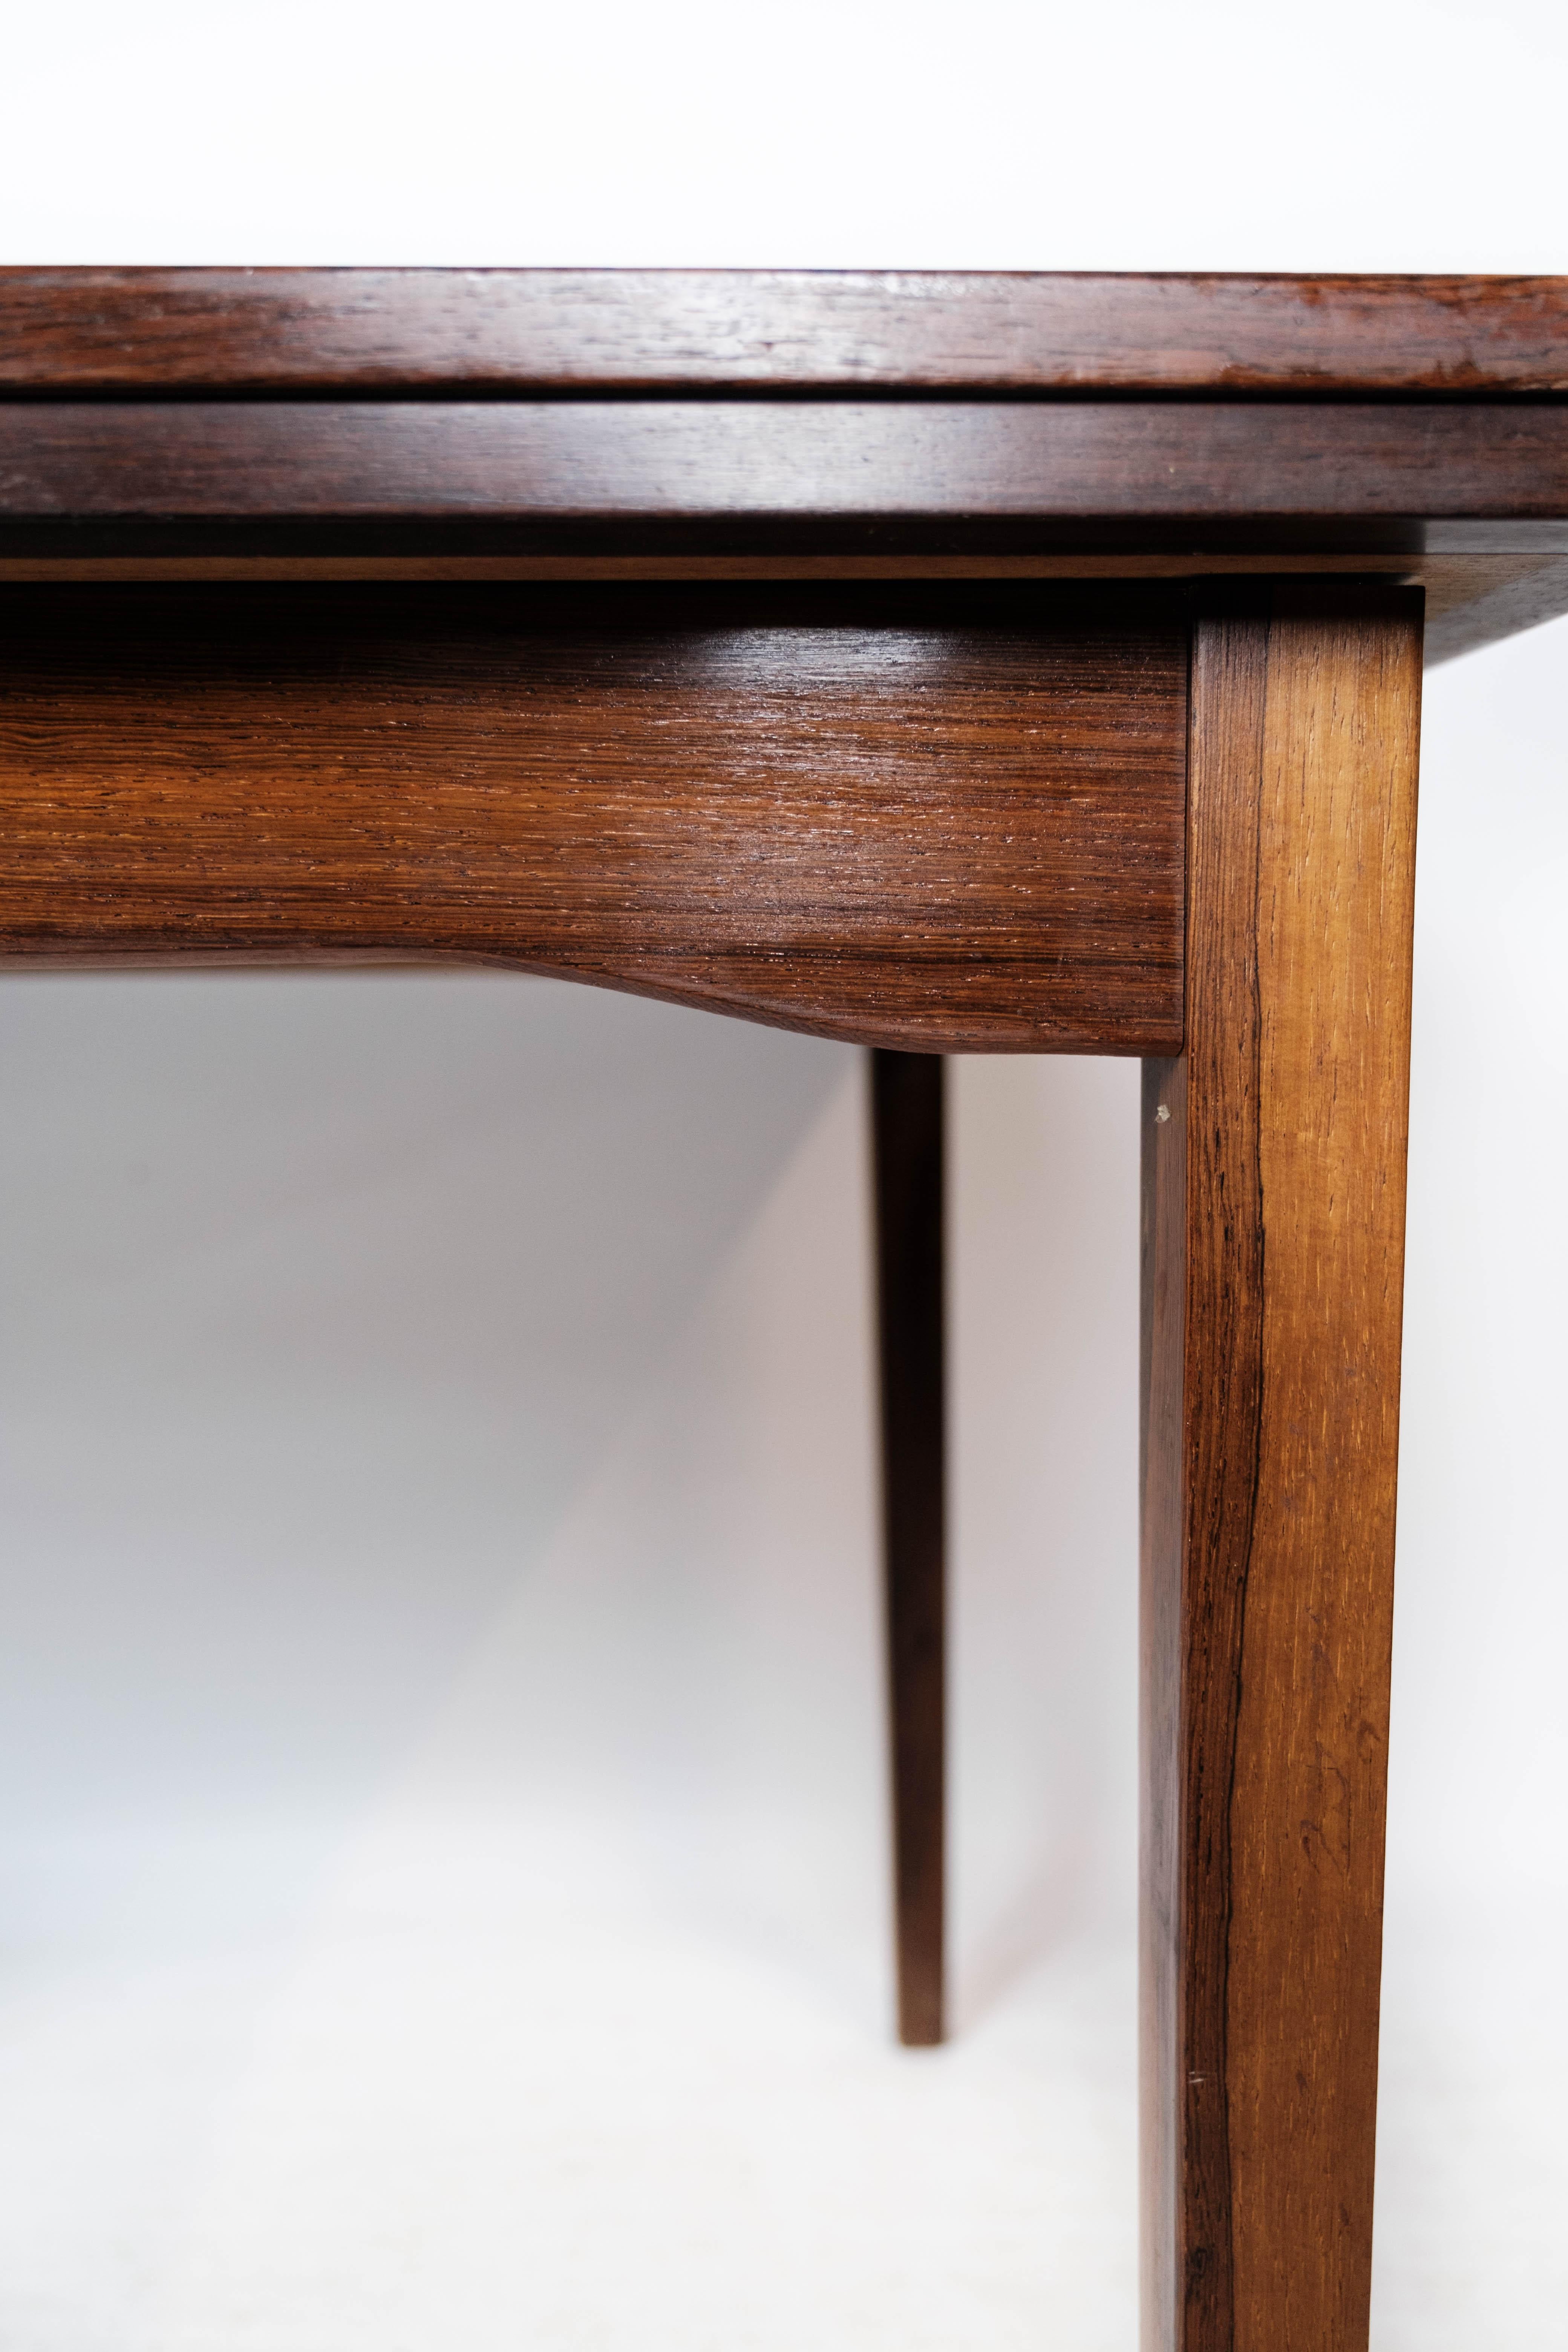 Dining Table in Rosewood with Extension, of Danish Design by Ellegaard, 1960s For Sale 4